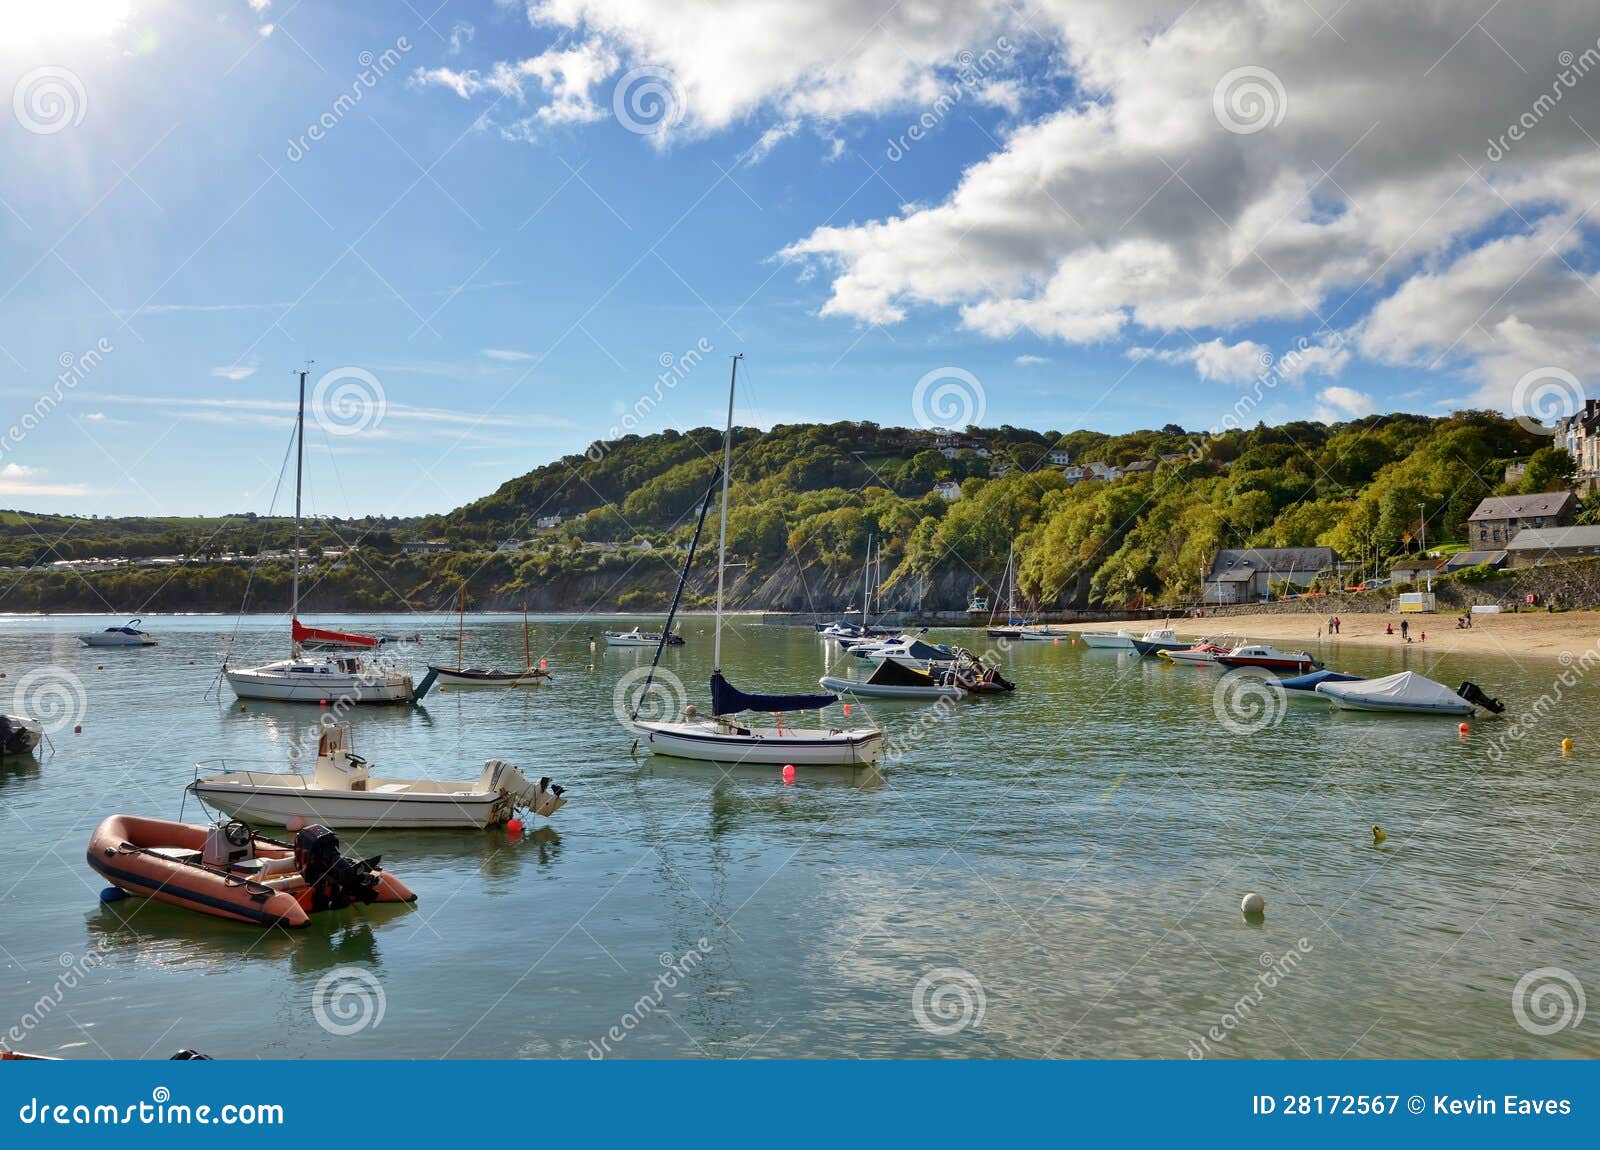 view of boats in new quay harbour, wales.